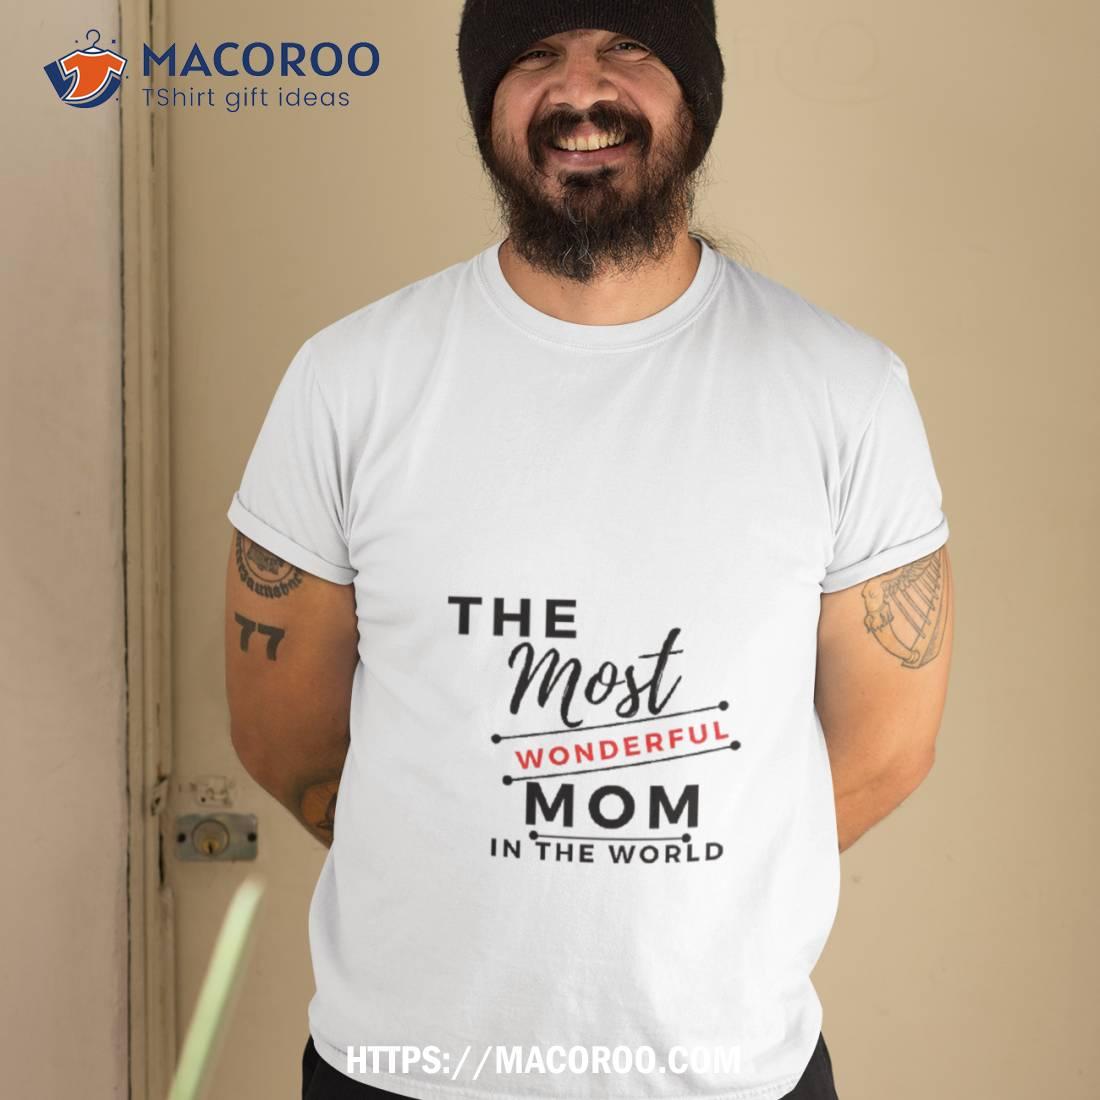 https://images.macoroo.com/wp-content/uploads/2023/08/the-most-wonderful-mom-mom-gift-shirt-christmas-gifts-for-my-mom-tshirt-2.jpg